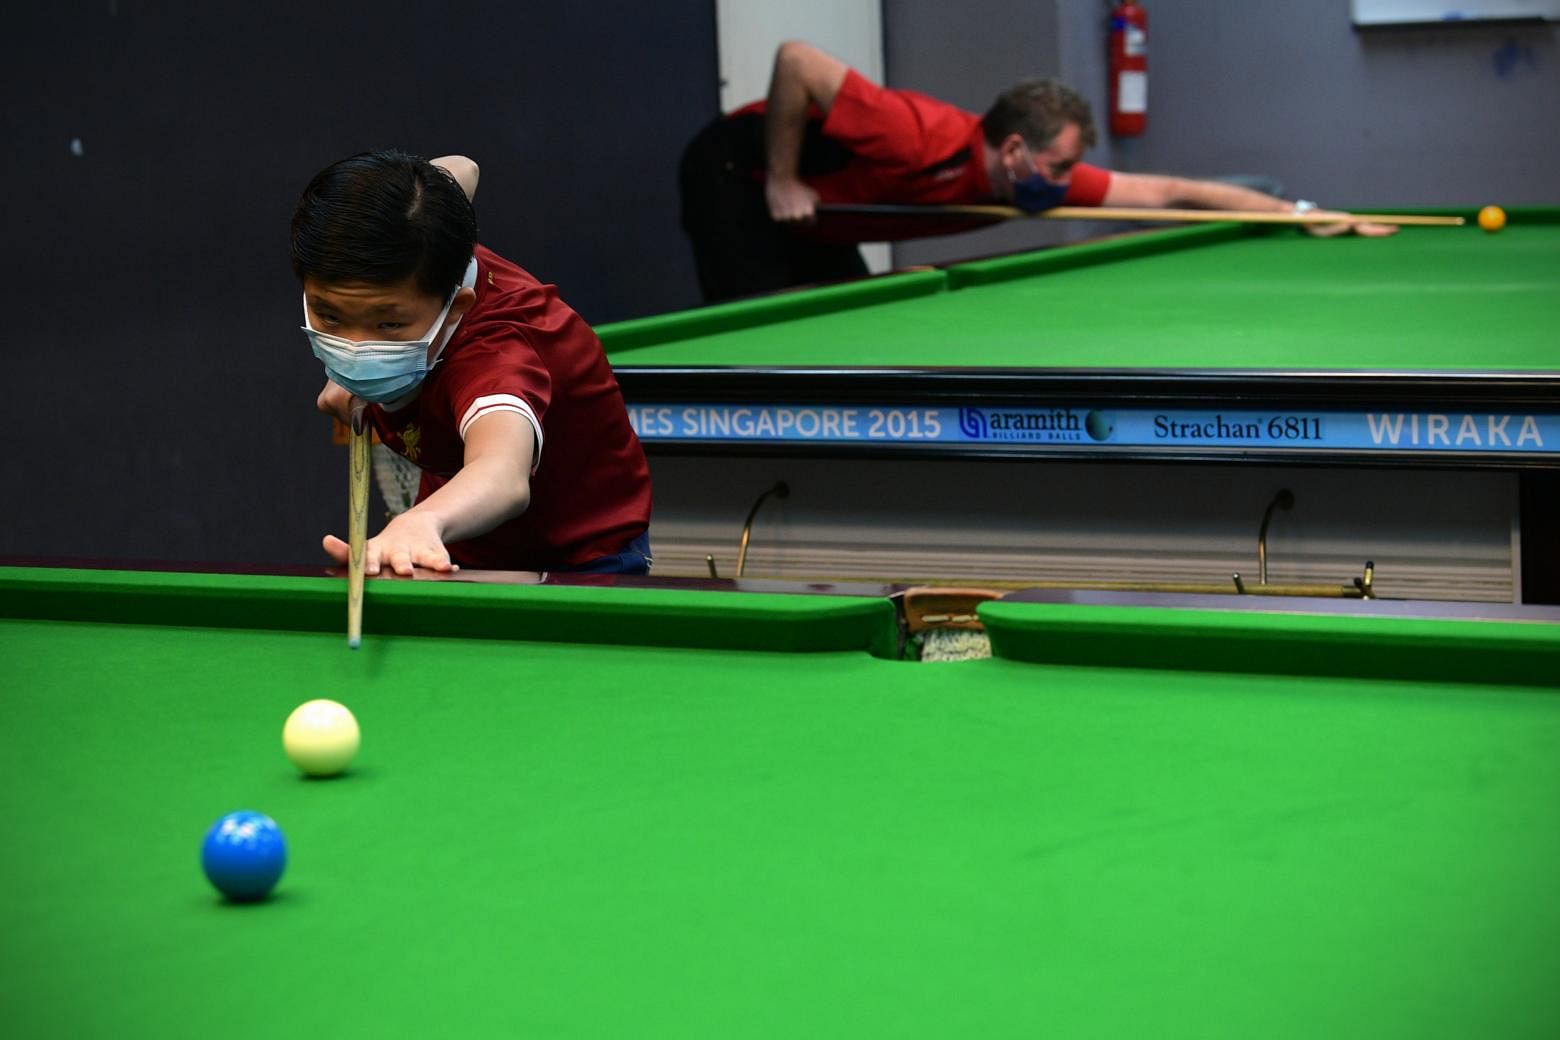 Cue sports Centres of Excellence to be opened in Spore this year to groom local talent The Straits Times